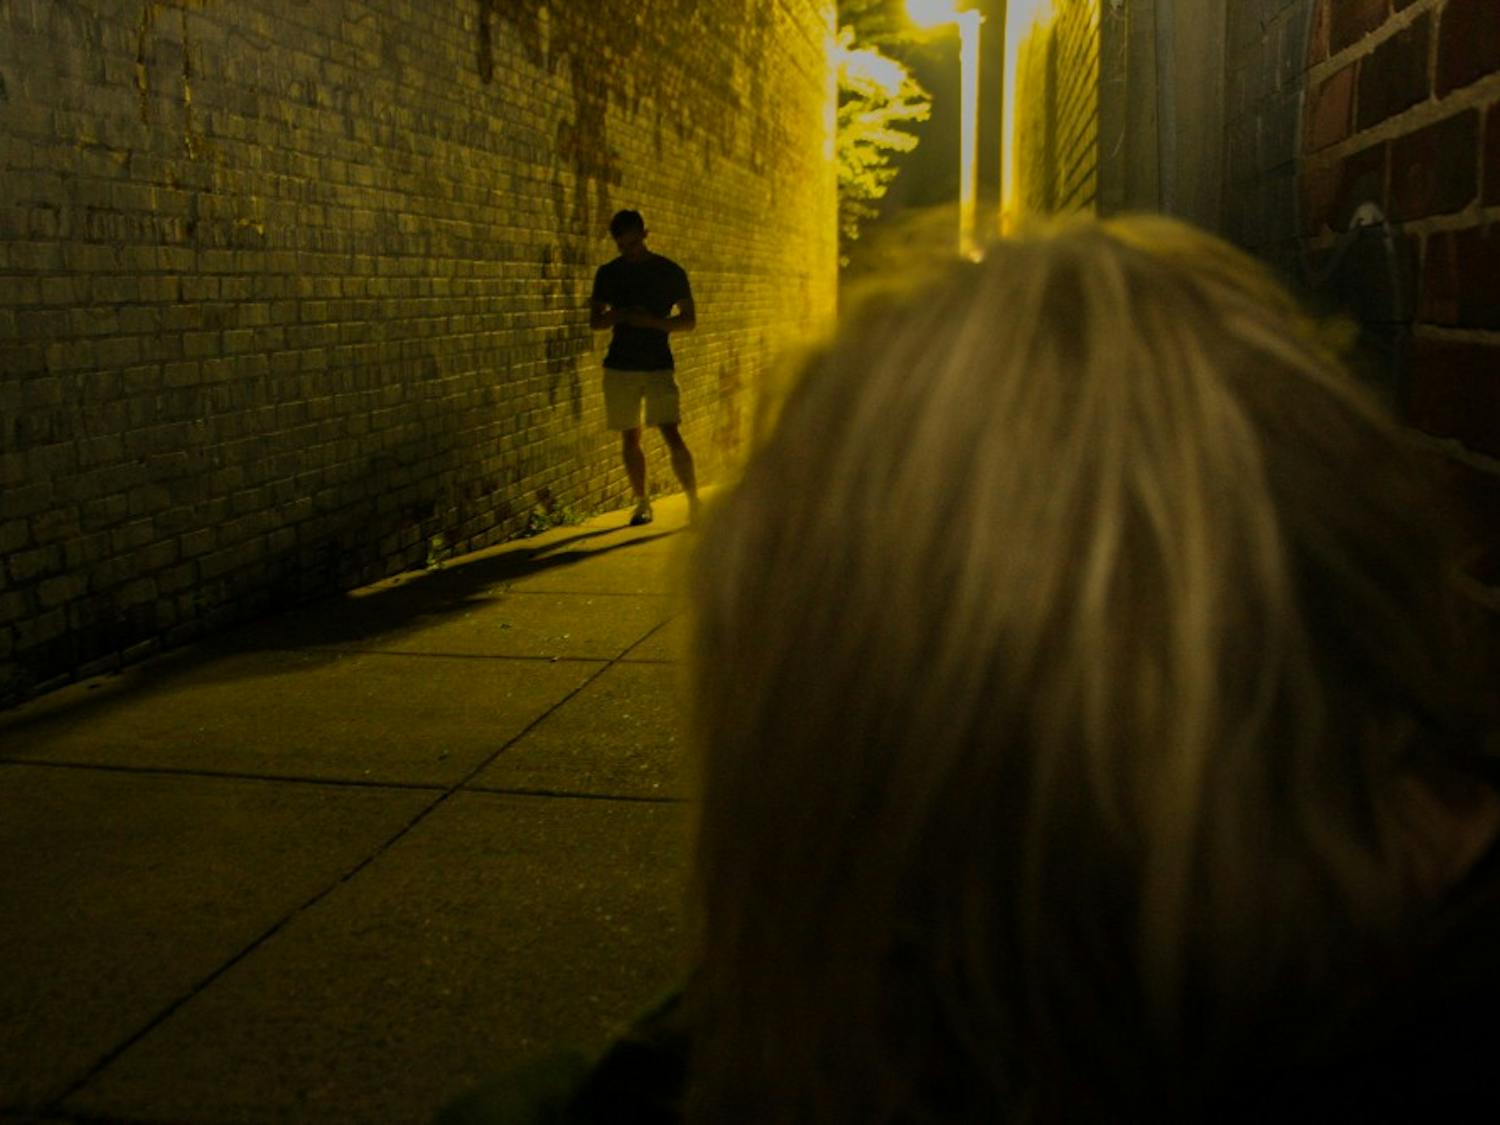 DTH Photo Illustration. A woman sits in an alley, alone, while a man on his phone walks by paying no attention to her.